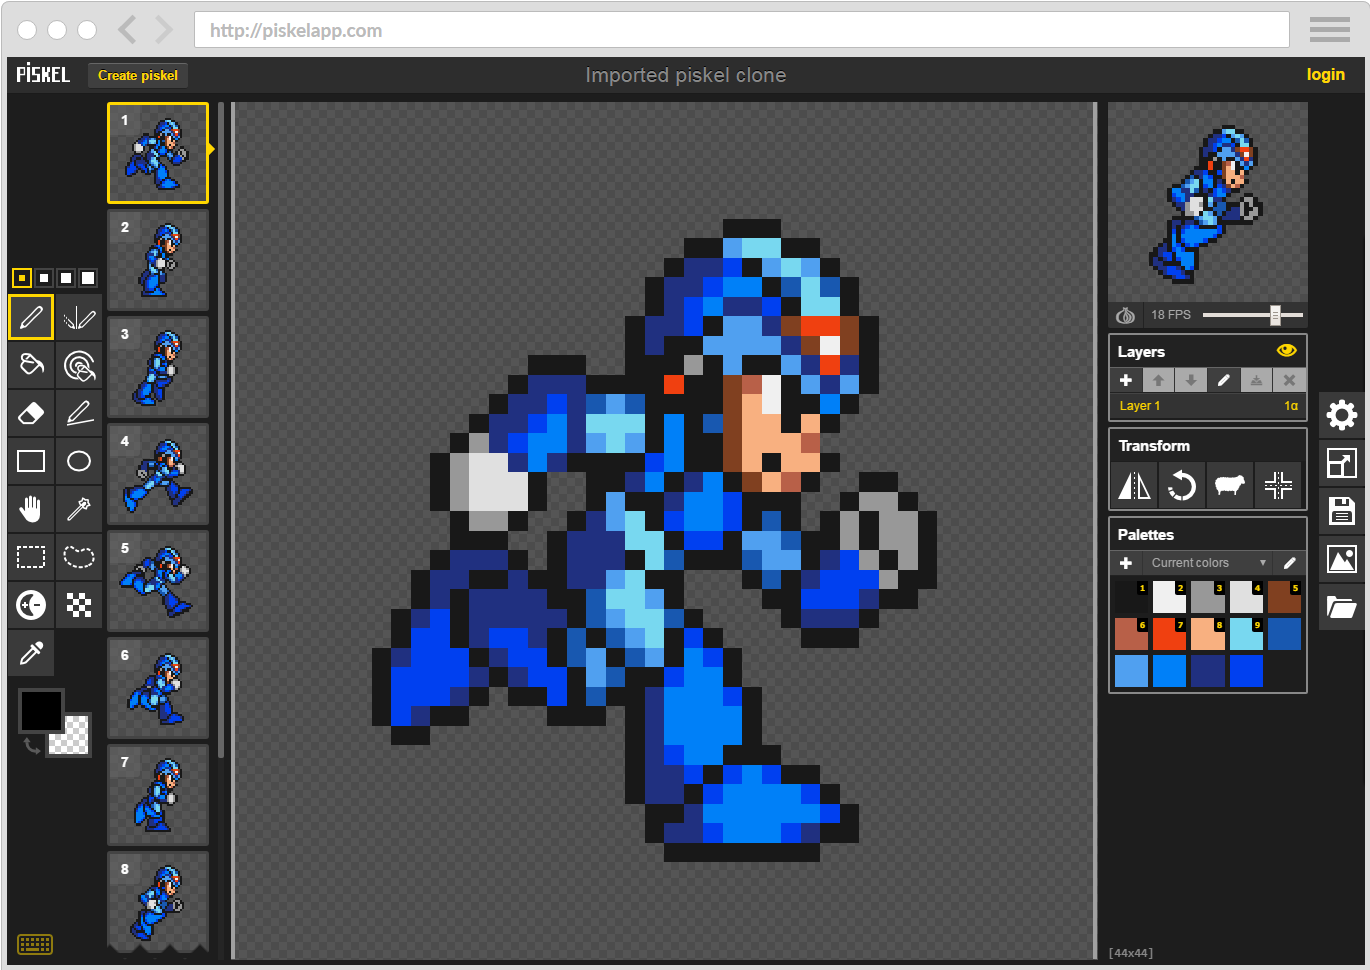 GitHub - piskelapp/piskel: A simple web-based tool for Spriting and Pixel  art.